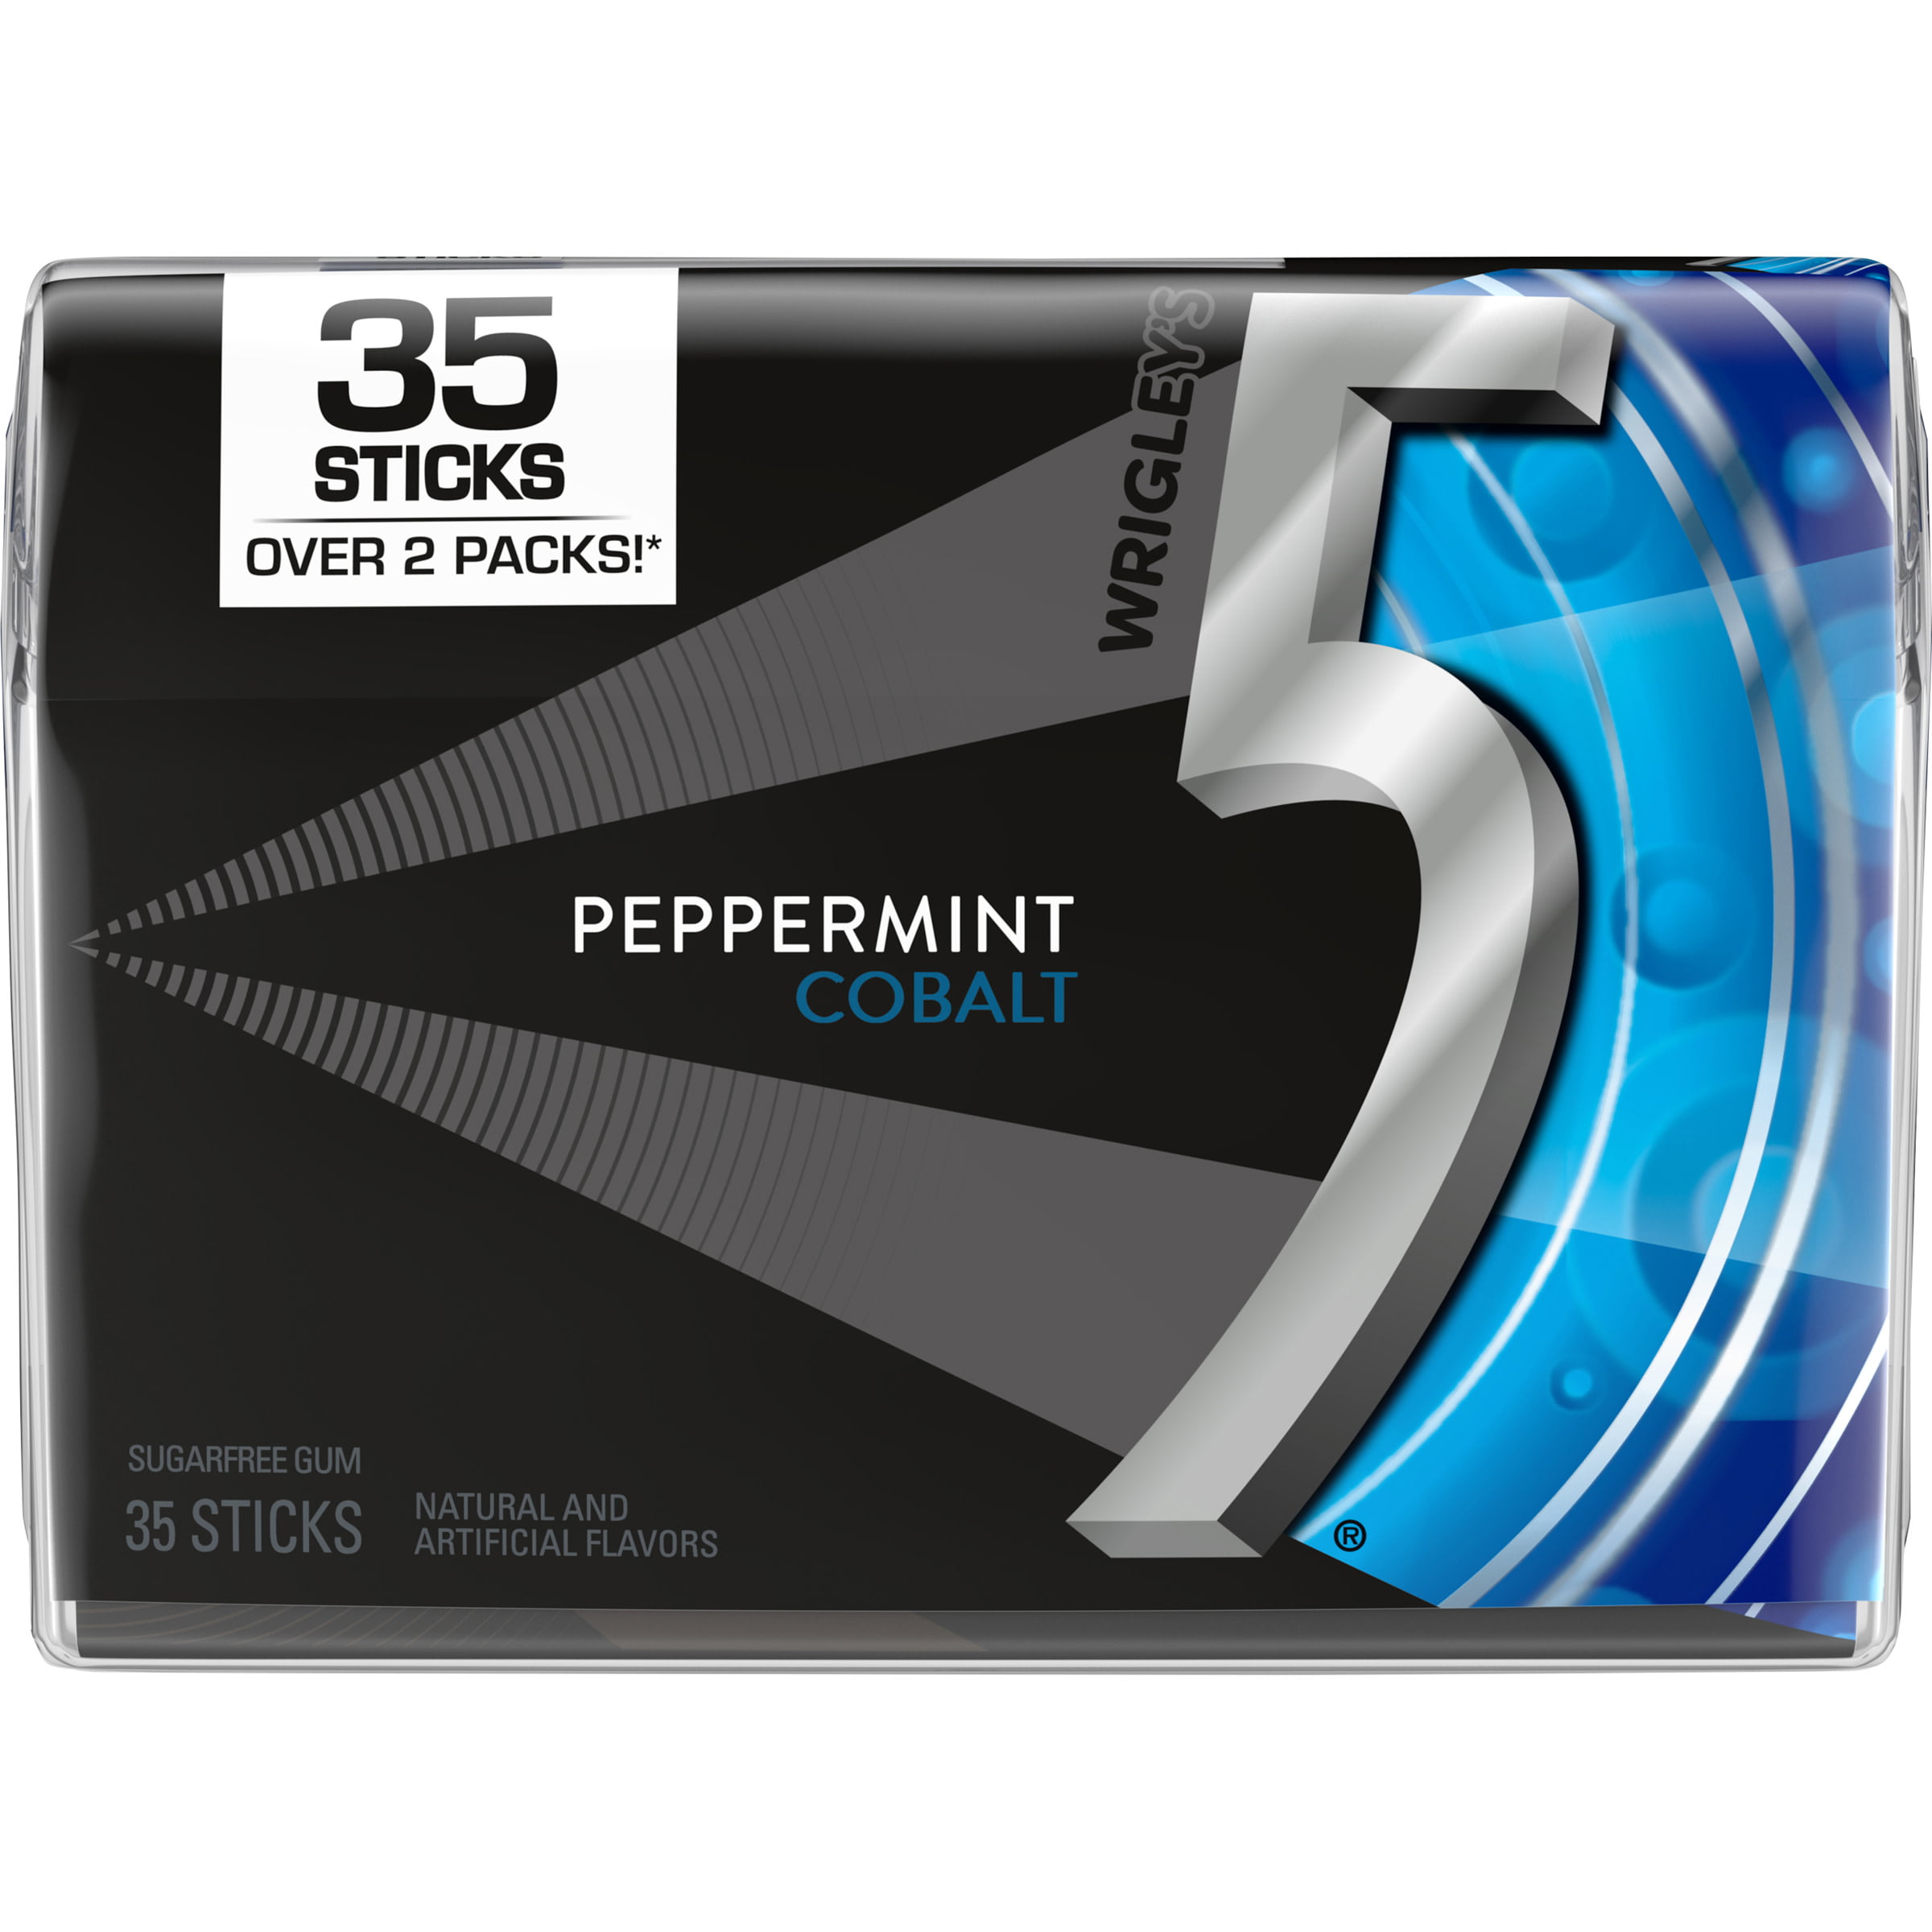 5 Pack of Spearmint Peppermint Toothpick in Tubes And Hanging Resealable Bag